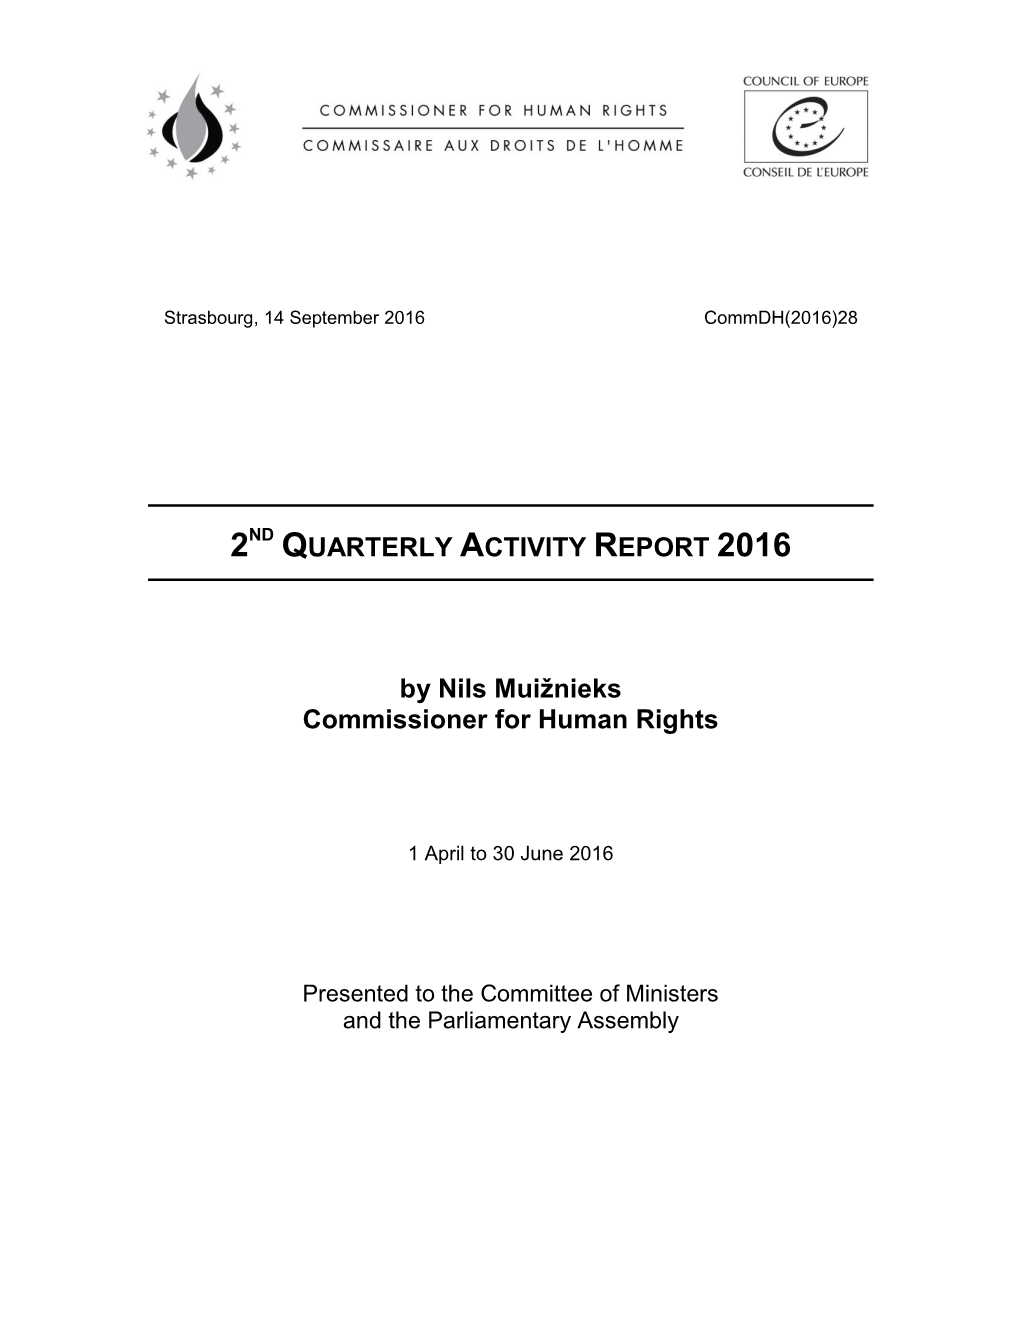 QUARTERLY ACTIVITY REPORT 2016 by Nils Muižnieks Commissioner for Human Rights